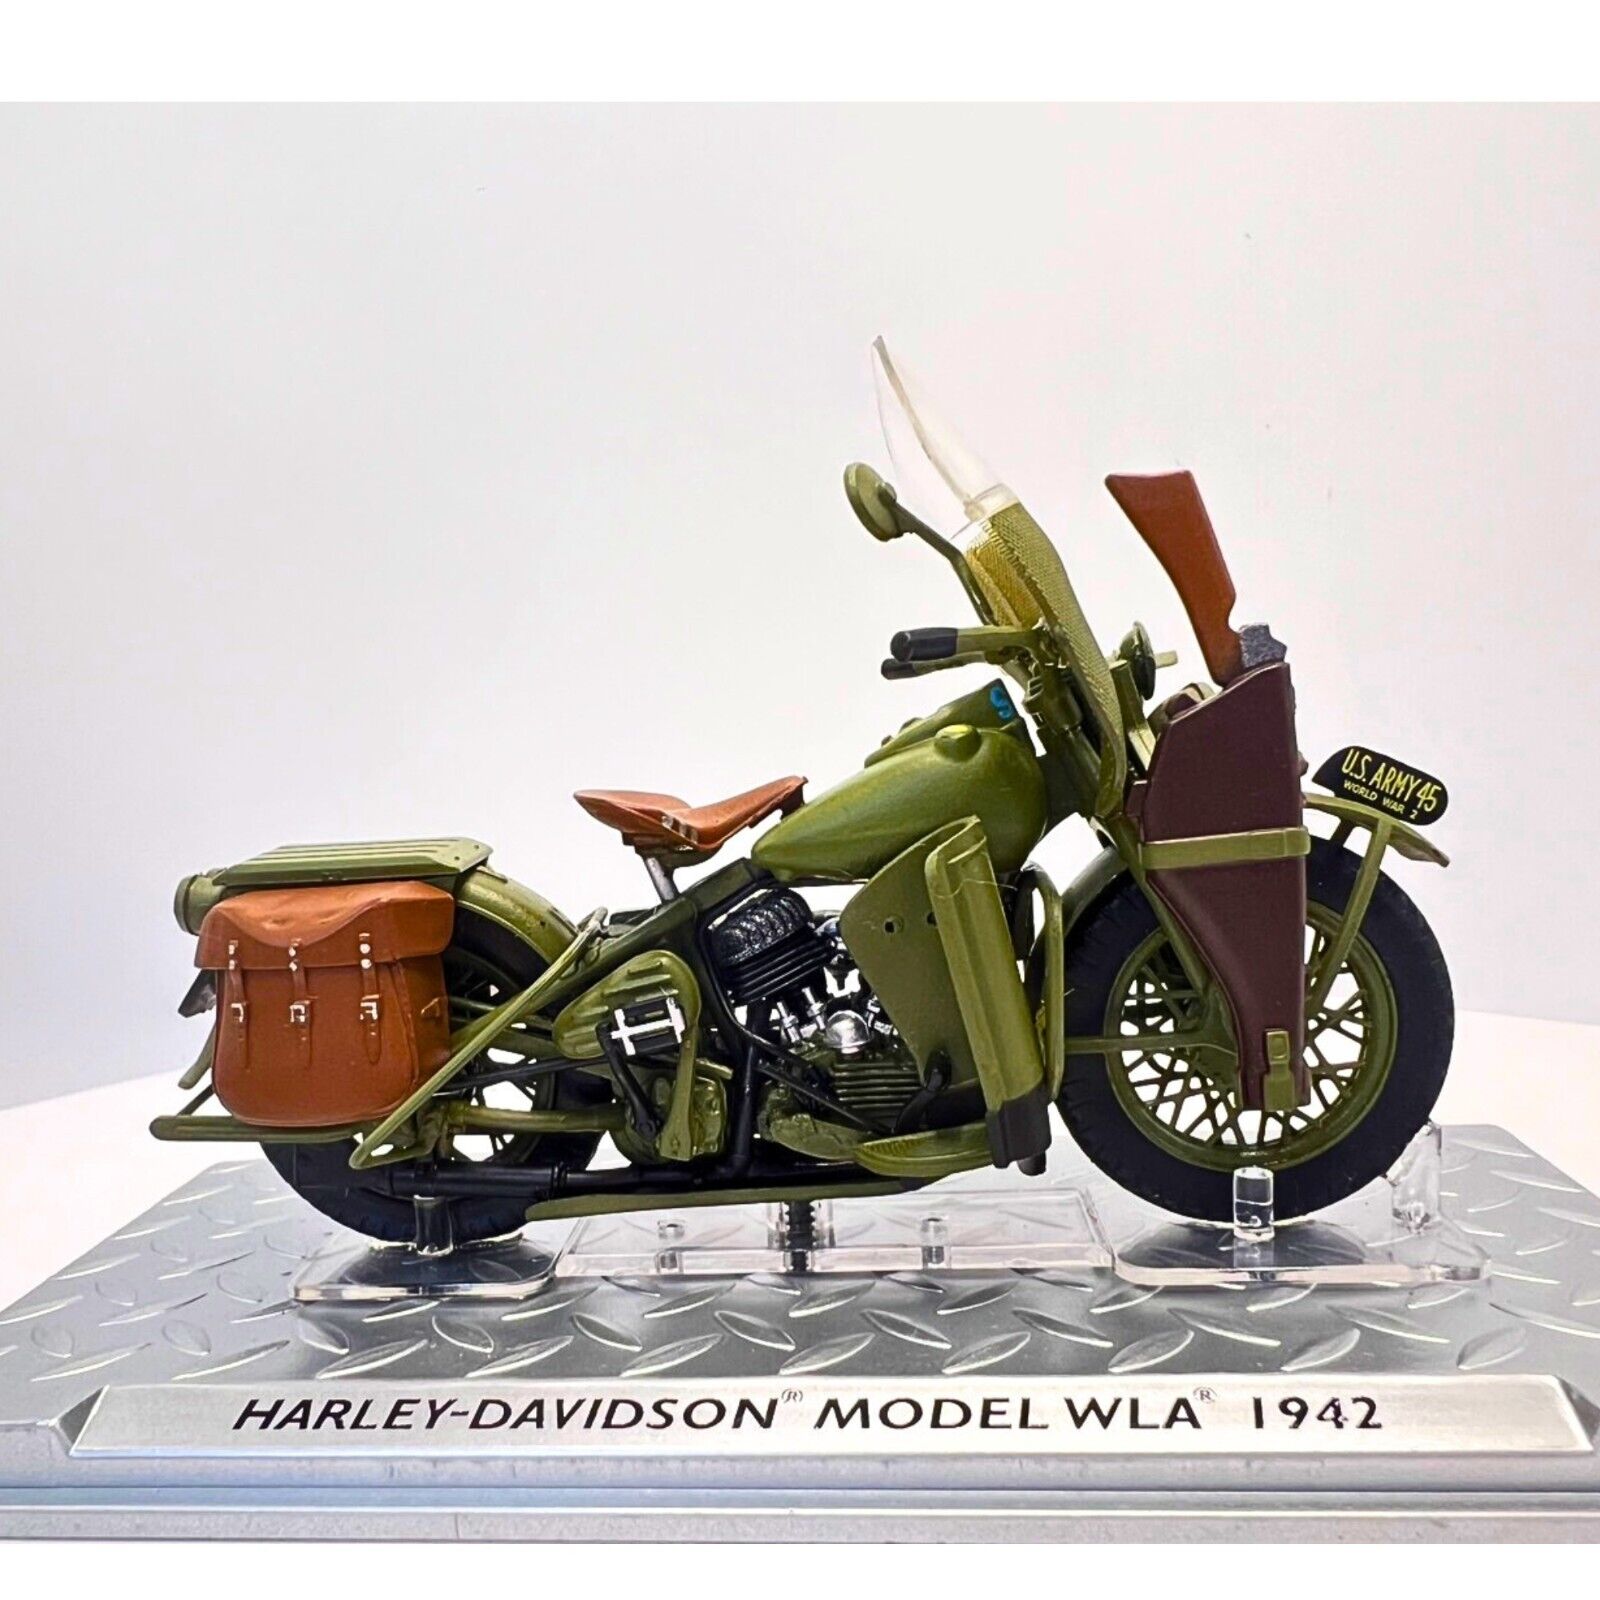 1942 HARLEY-DAVIDSON Motor Cycles MODEL WLA US.ARMY 45 Size 2.5 x 5 inches